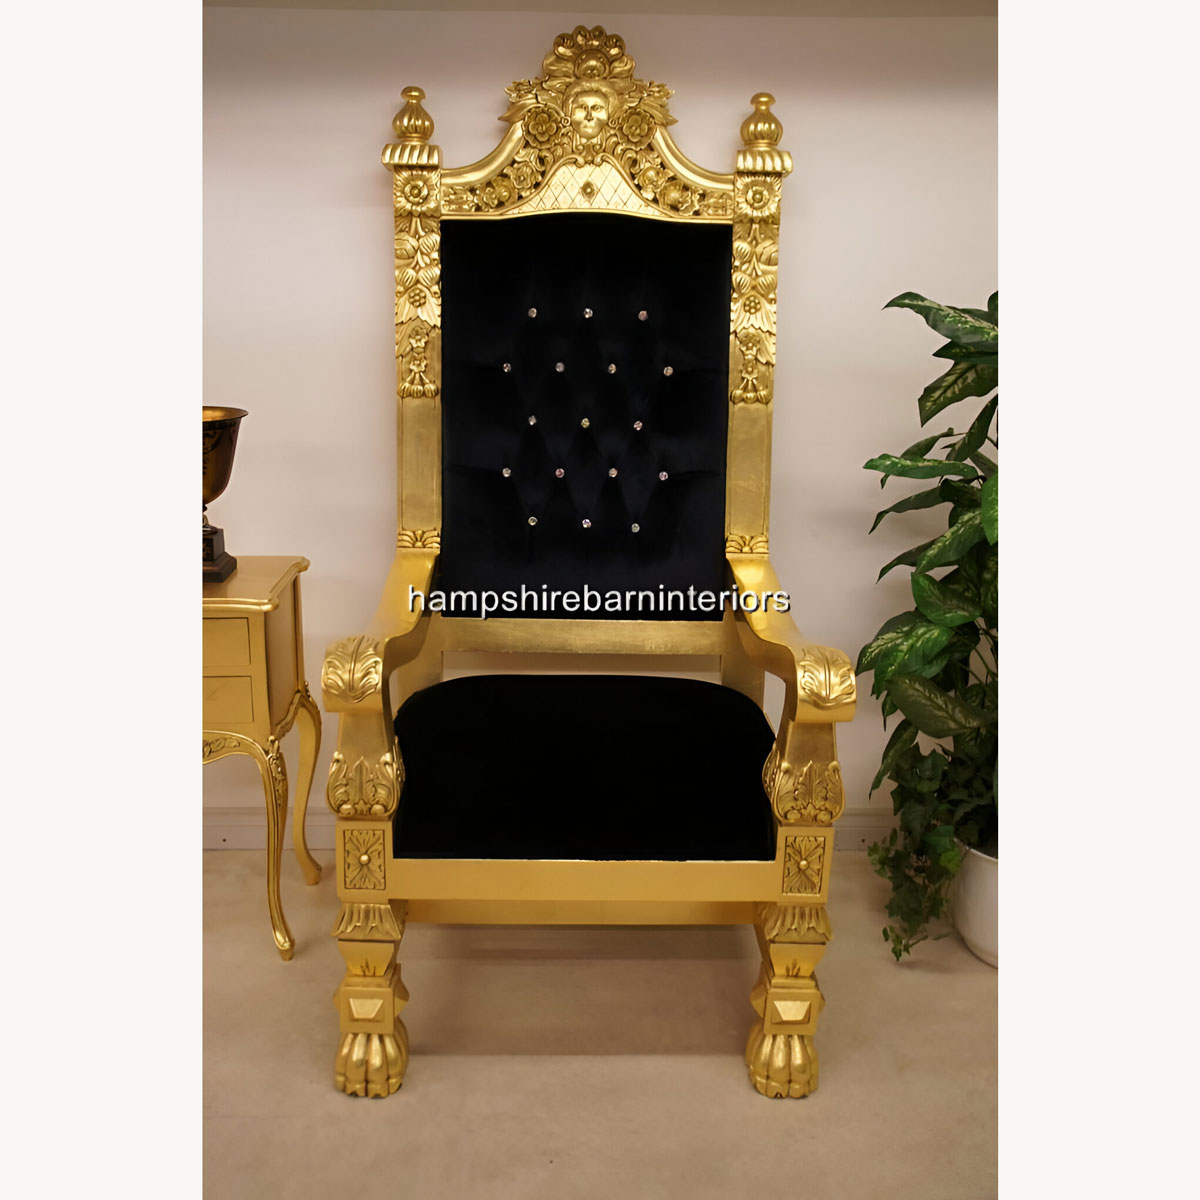 Queens Throne Chair Gold Leaf Black Velvet And Diamond Crystal Buttons 1 - Hampshire Barn Interiors - Queens Throne Chair Gold Leaf, Black Velvet And Diamond Crystal Buttons -